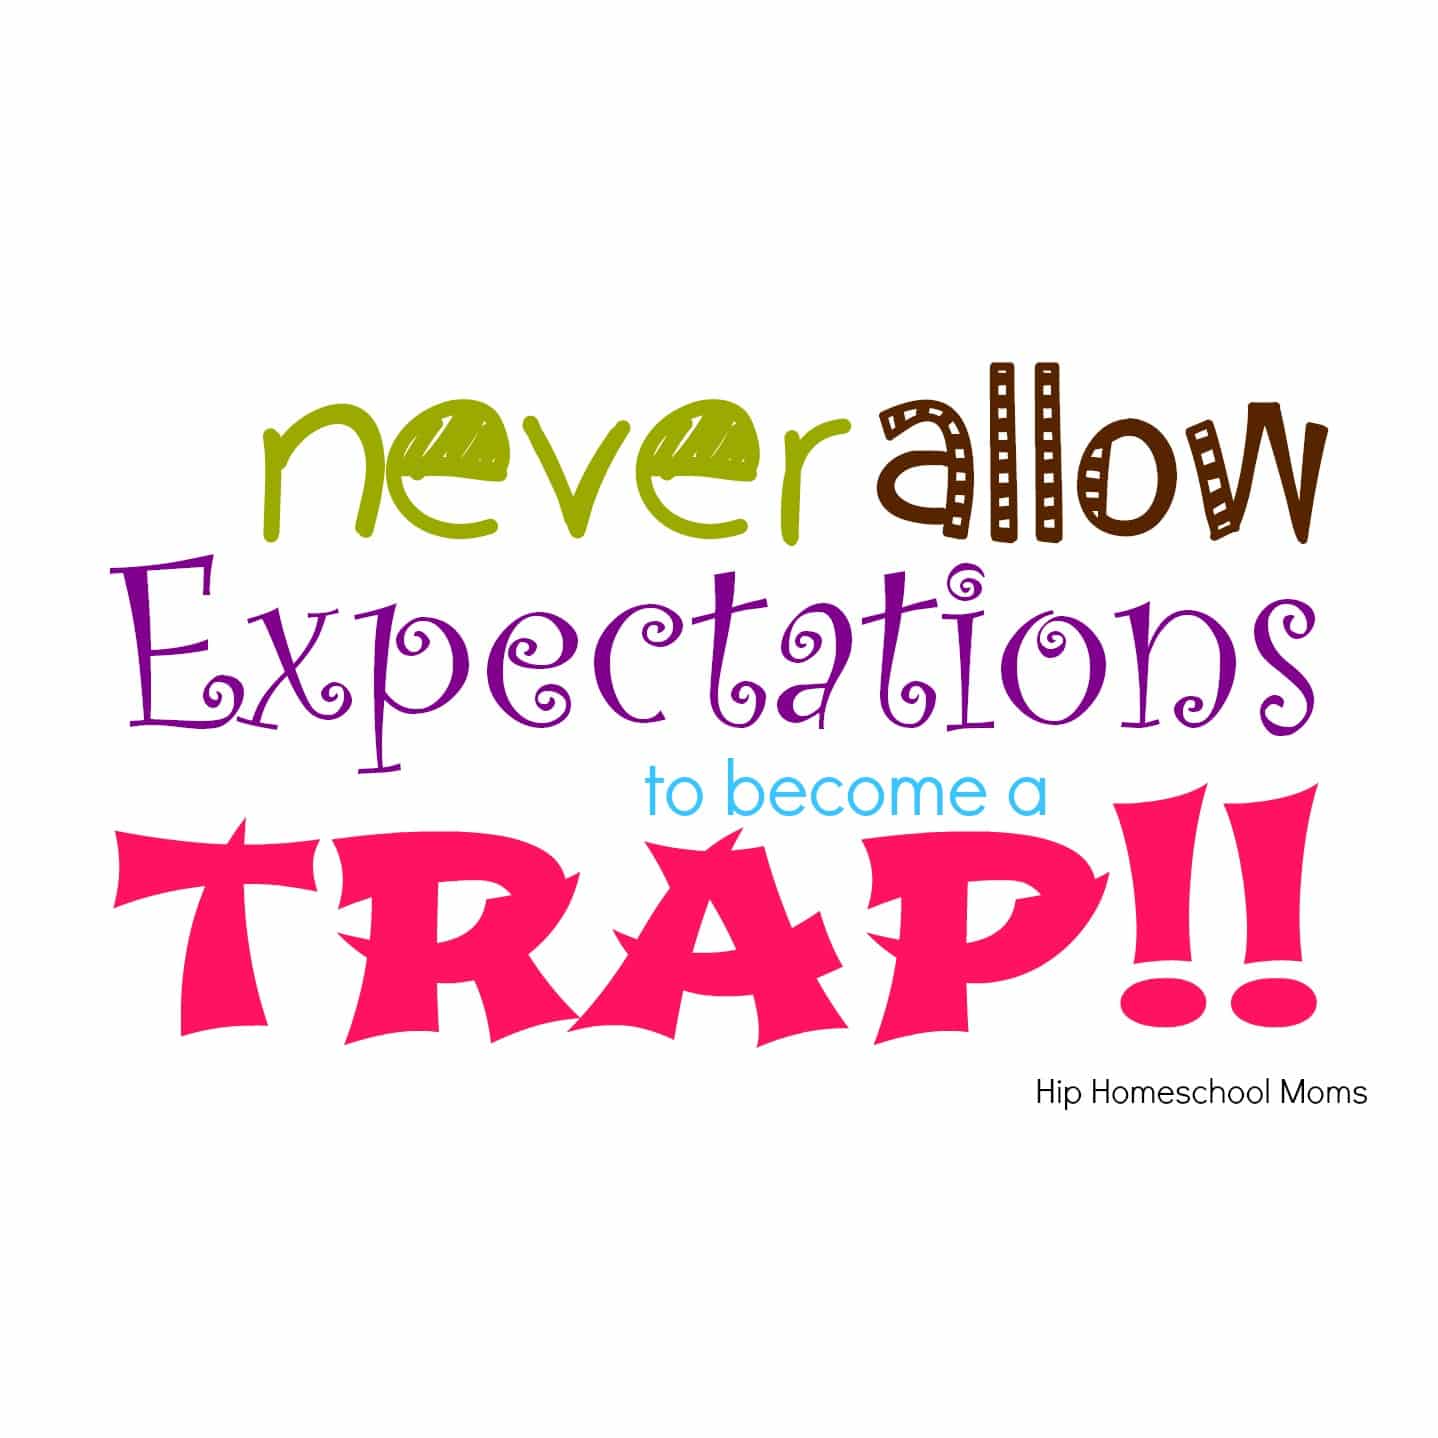 Never allow expectations to become a trap